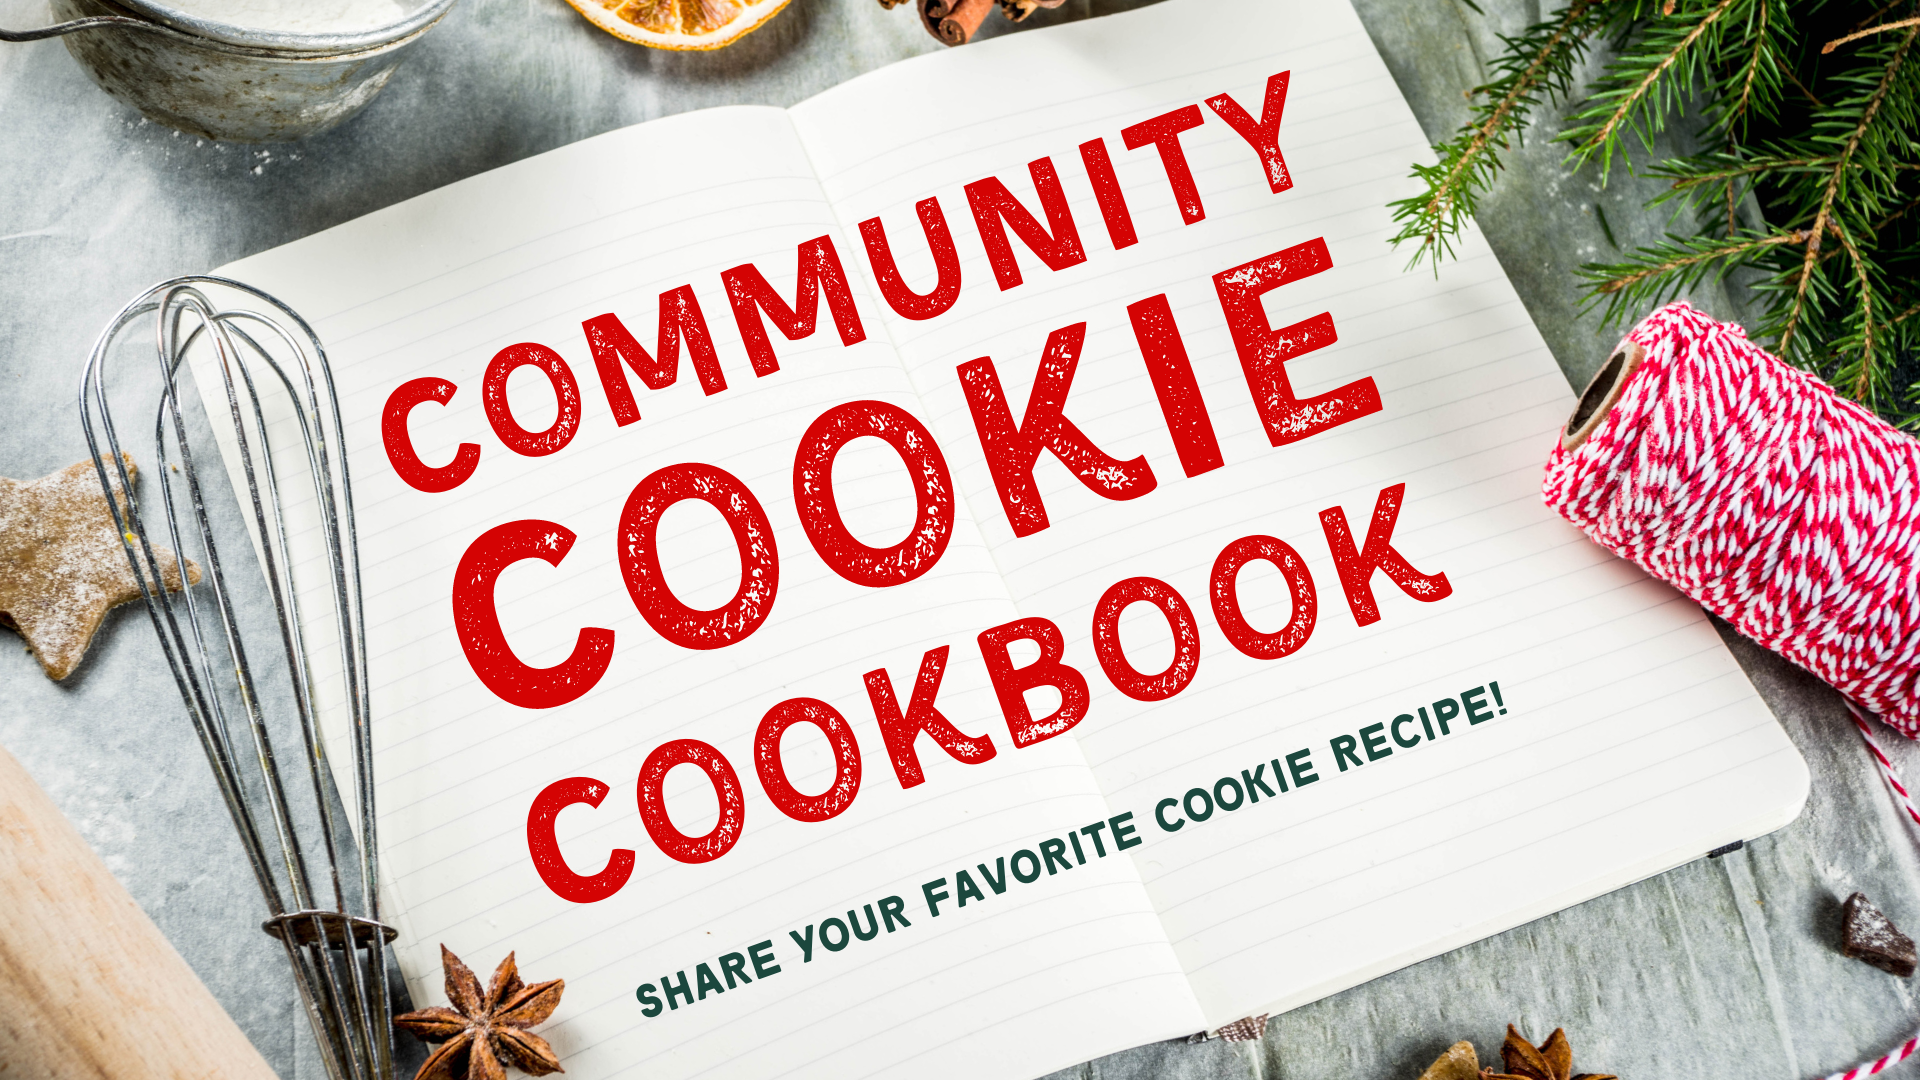 Community Cookie Cookbook: Share your favorite cookie recipe with us!